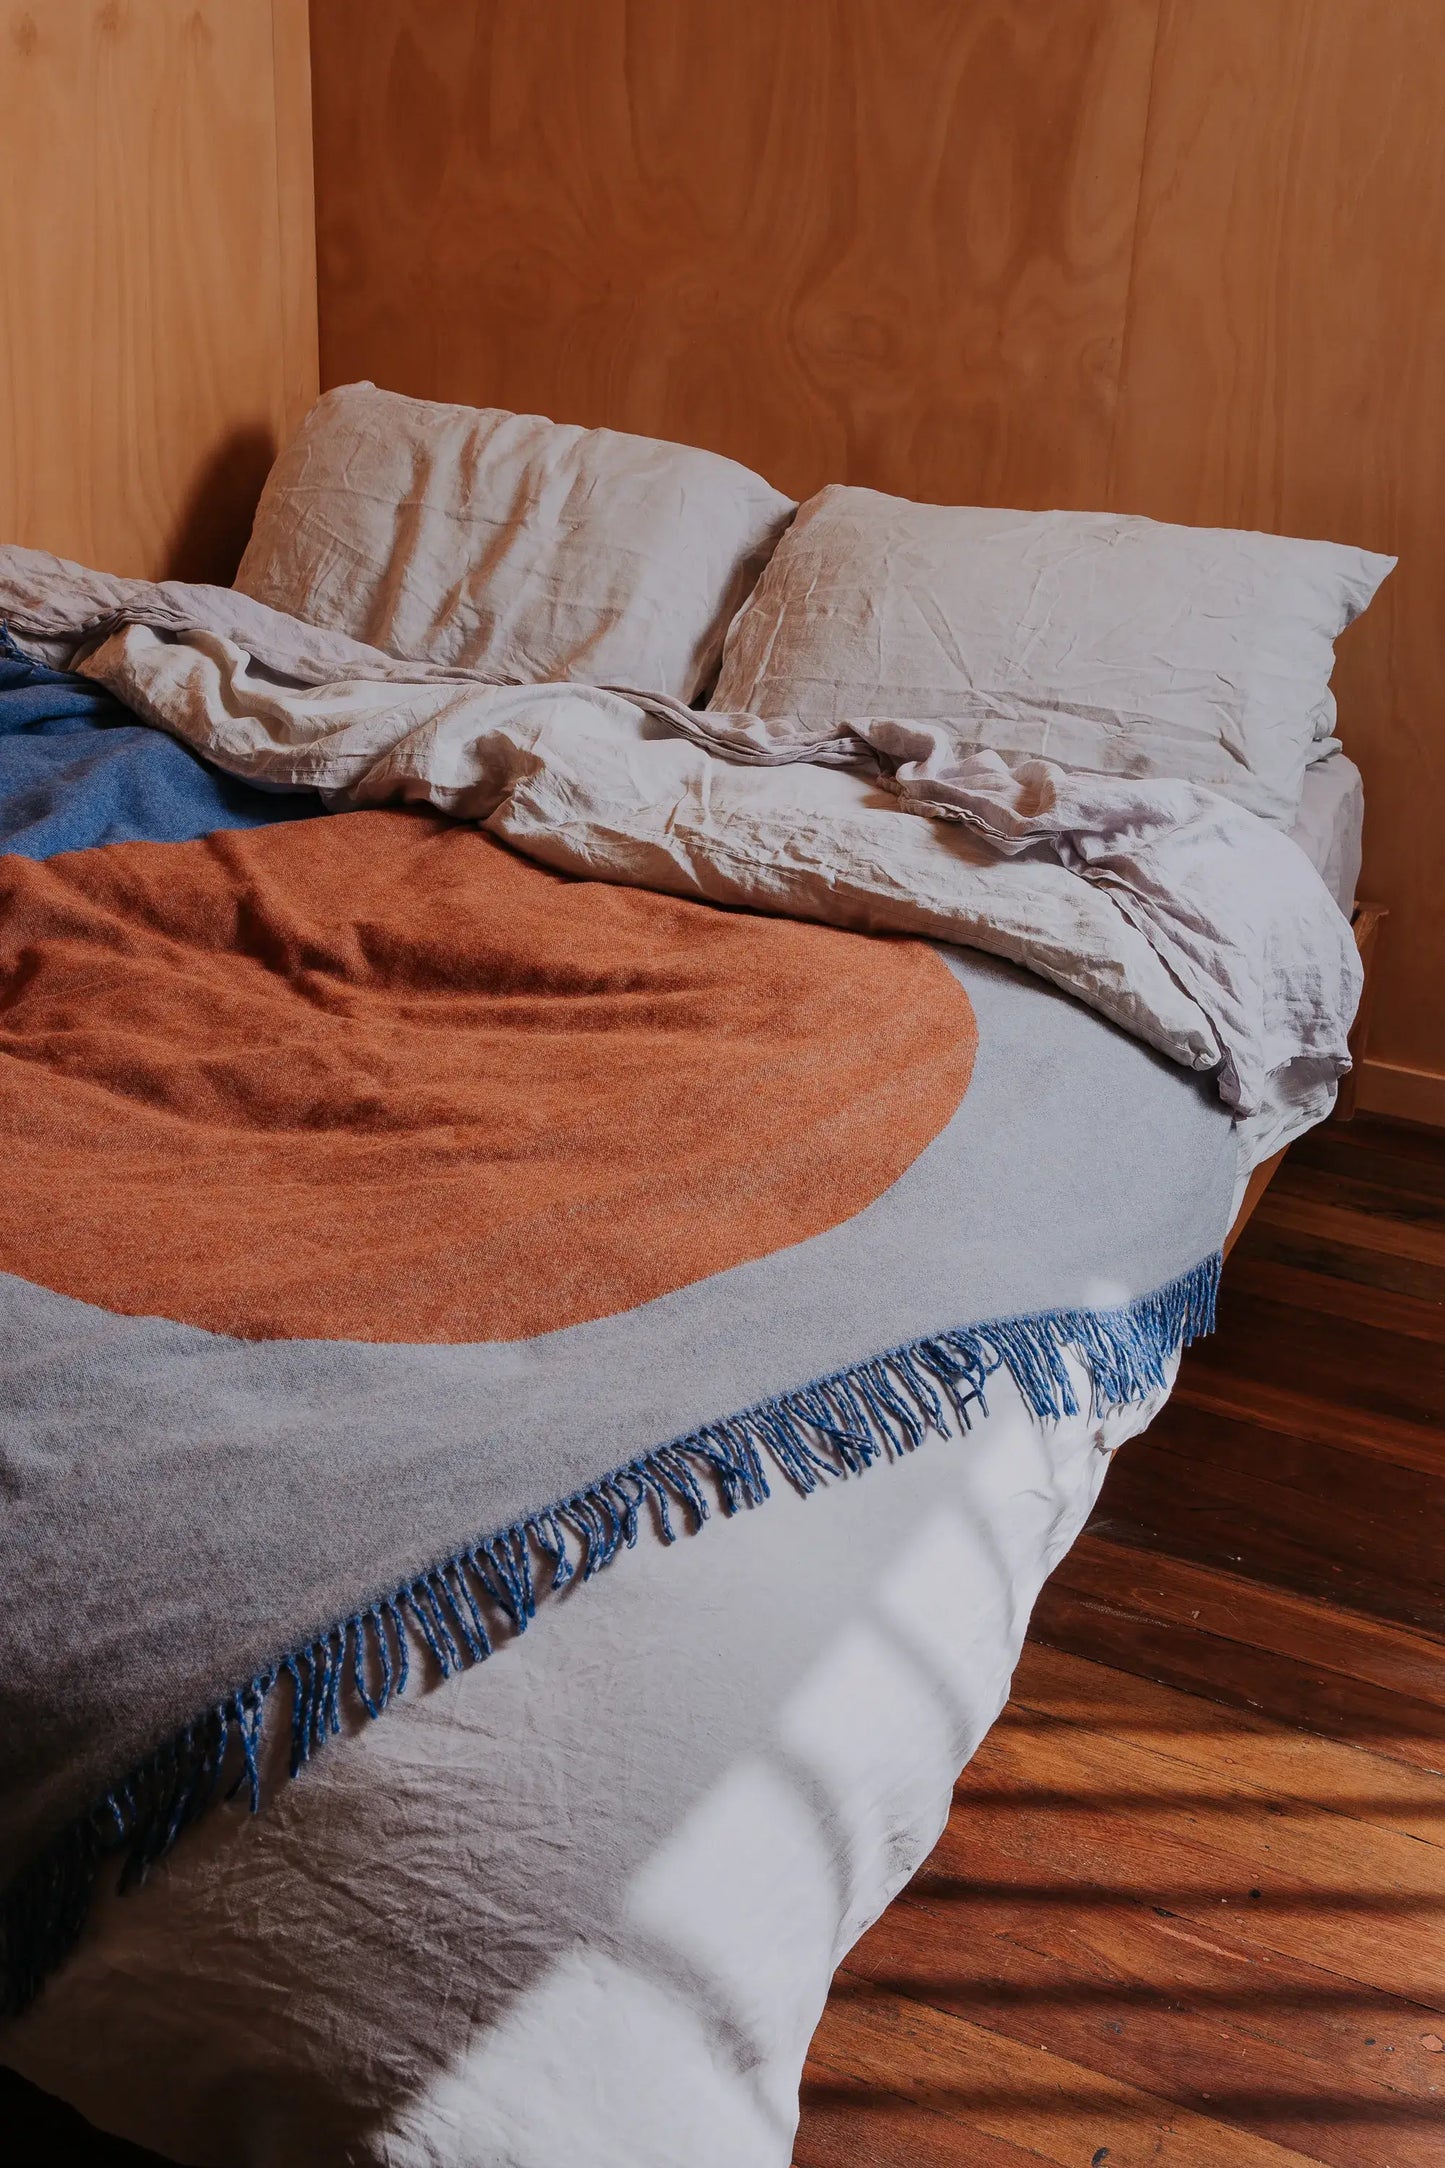 Ble, gray and orange wool blanket on a bed.